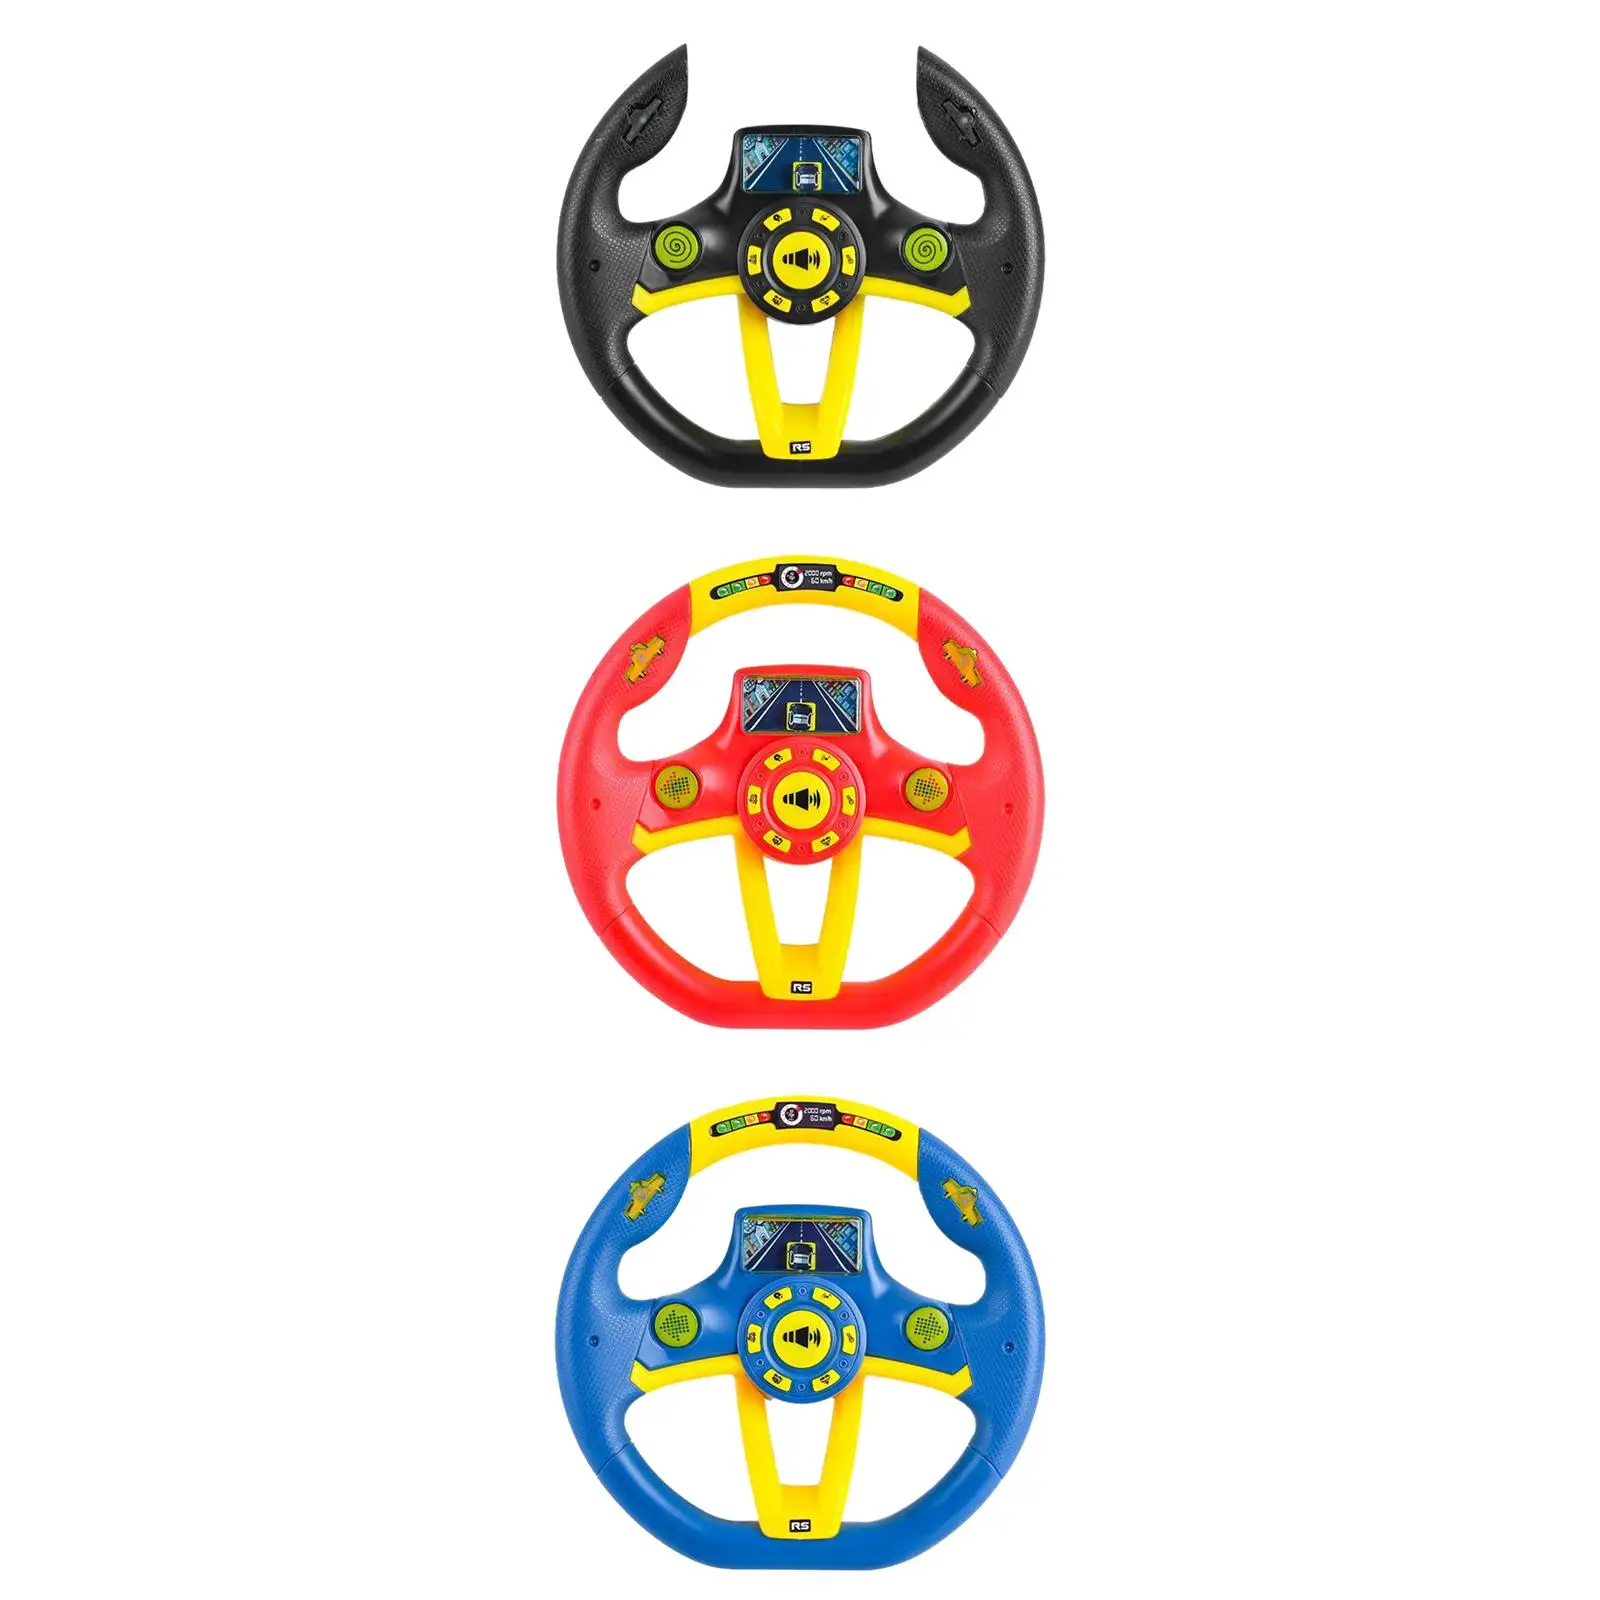 Simulation Steering Wheel Toy Driving Busy Board DIY Accessory for Climbing Frame Amusement Park Backyard Outdoor Birthday Gifts